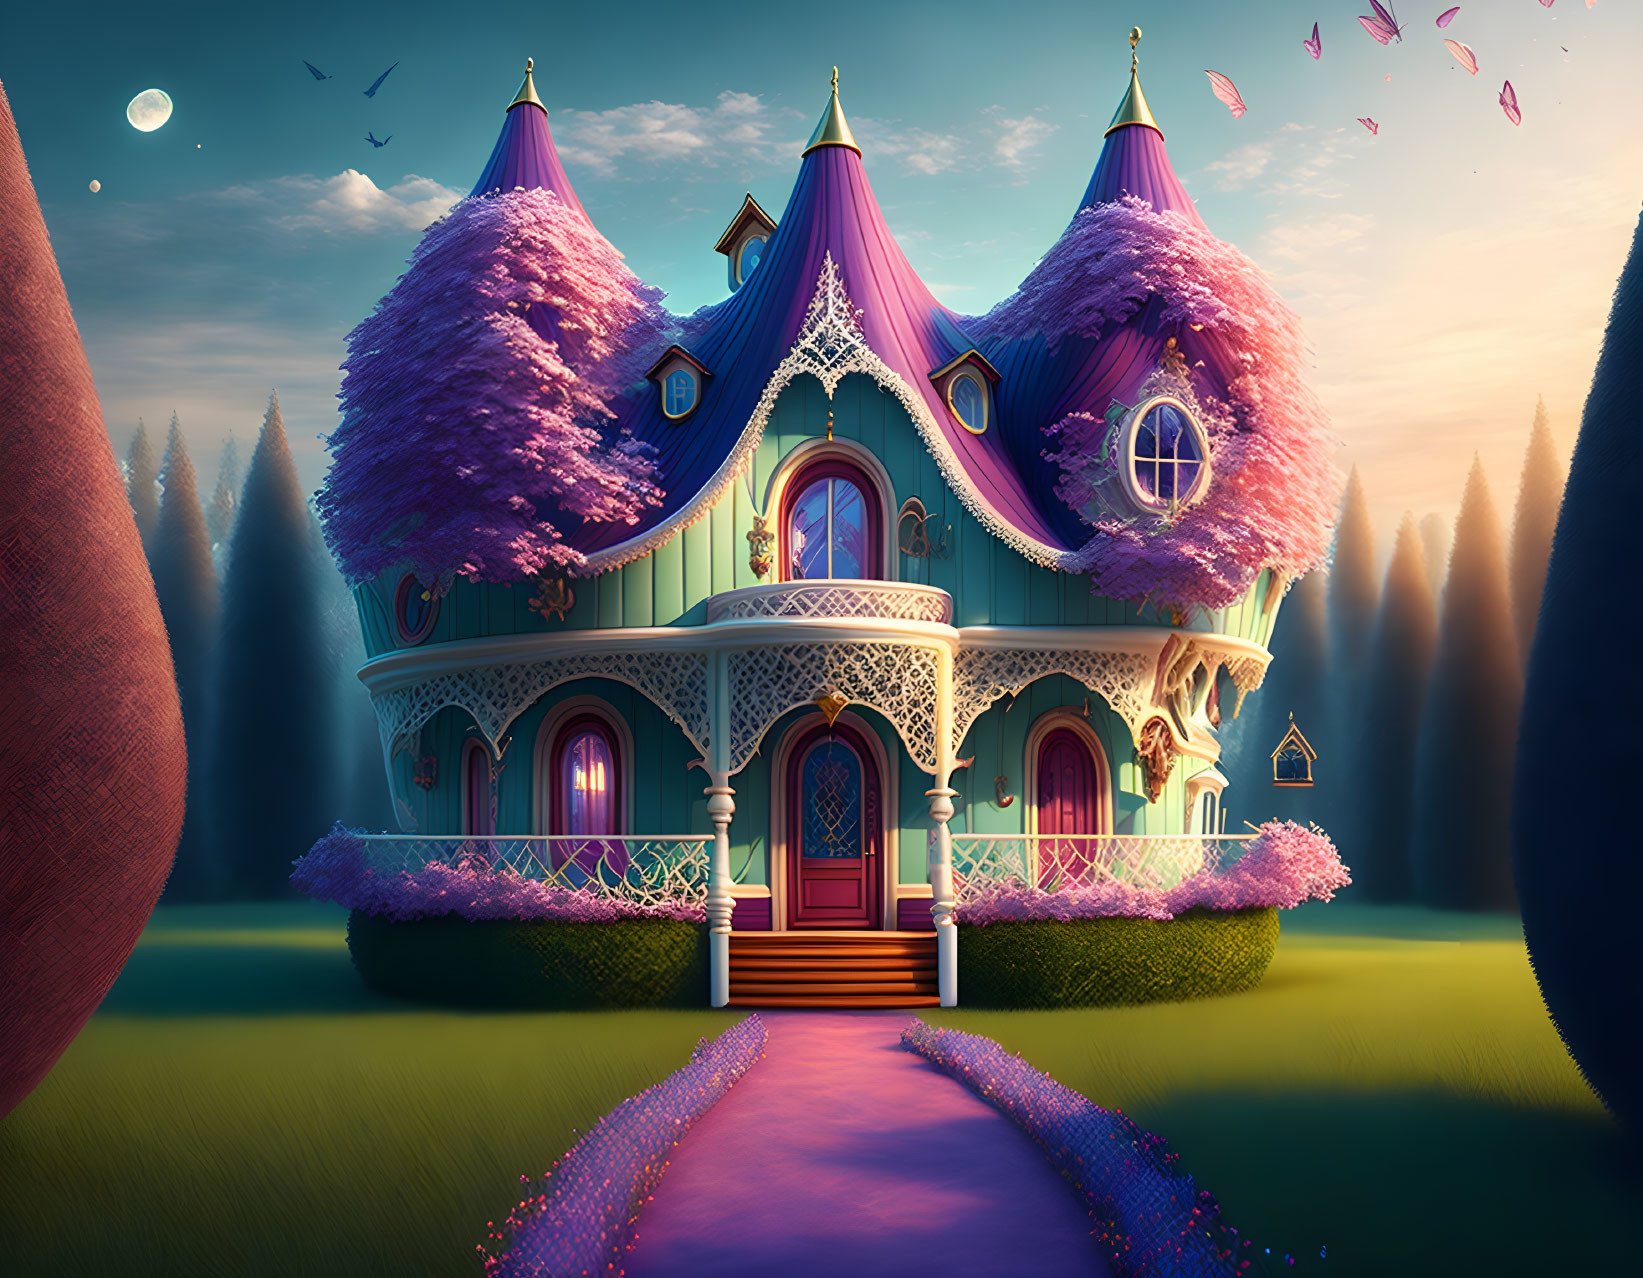 Enchanting house with purple trees in magical forest at dusk